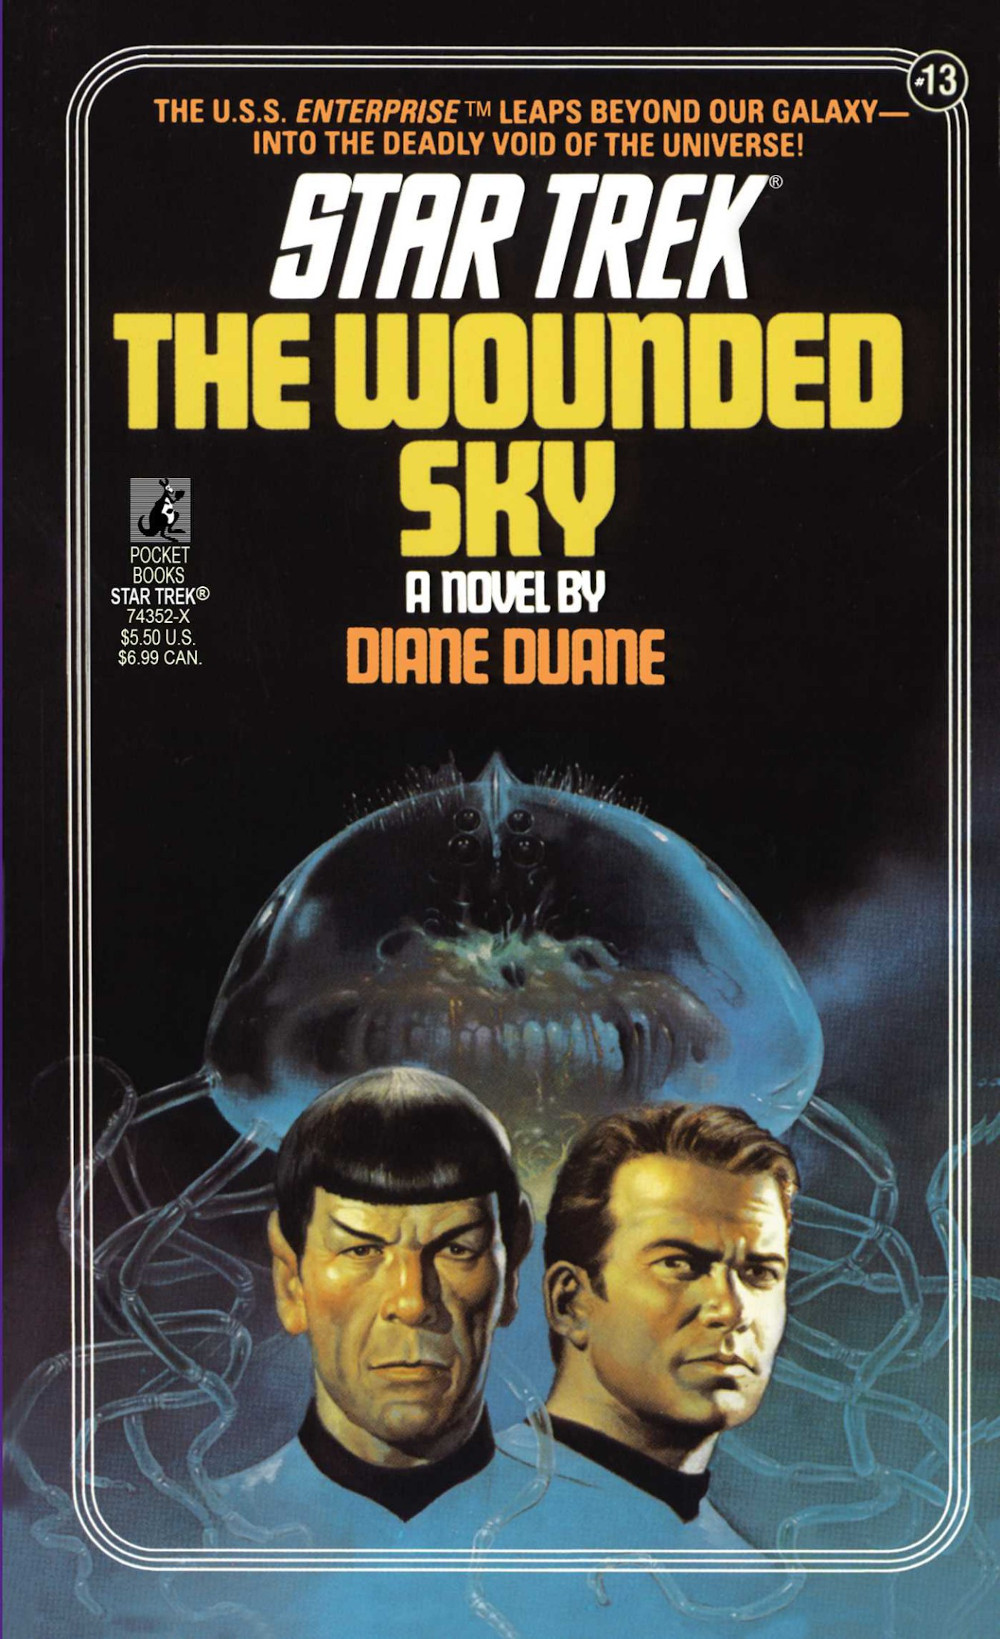 The Wounded Sky (Dec 1983)